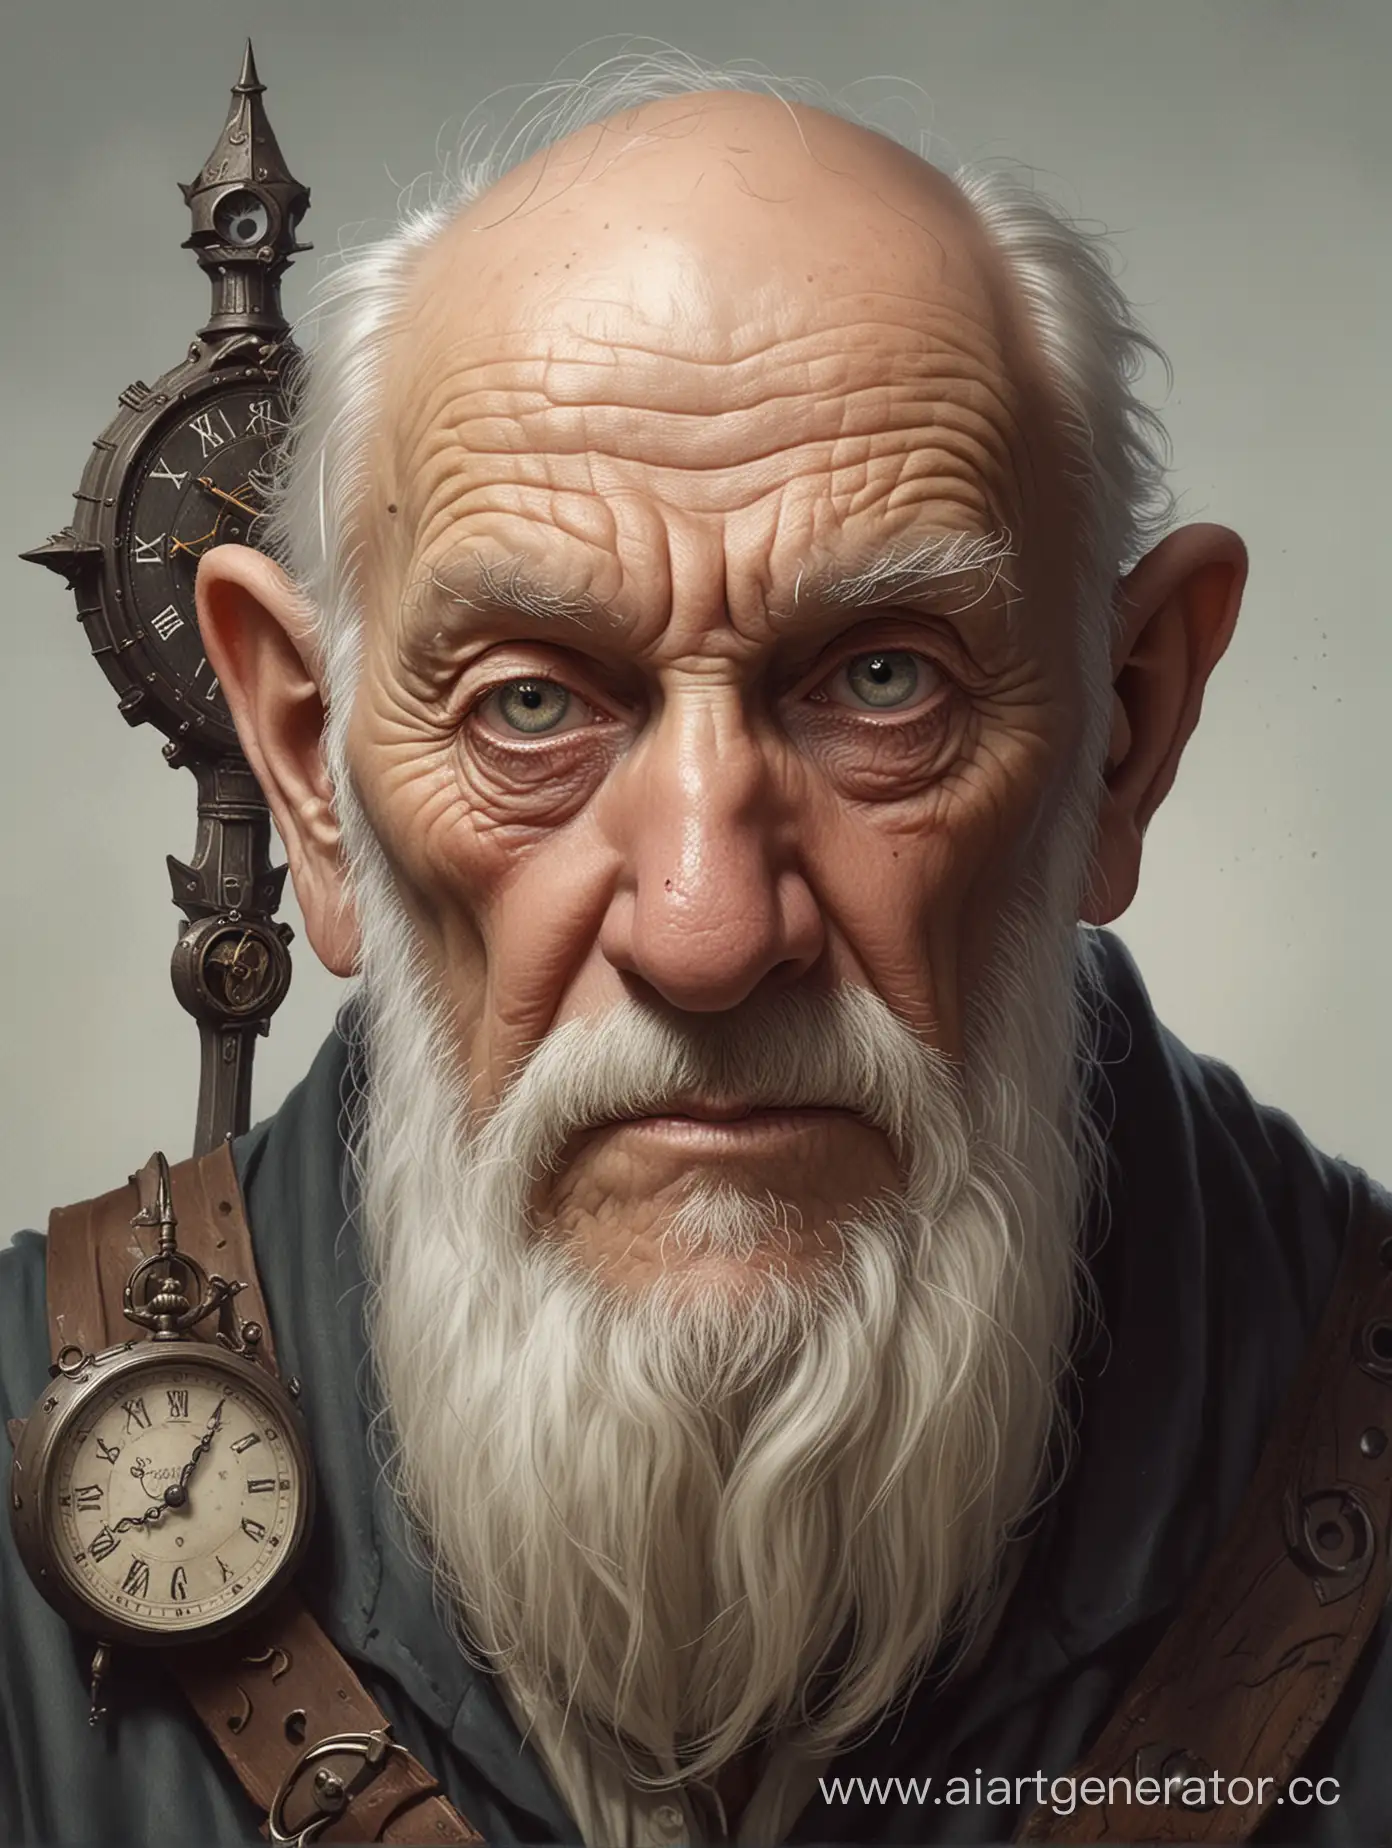 Elderly-Sorcerer-with-Clock-Eyes-Fantasy-Character-Art-Inspired-by-DnD